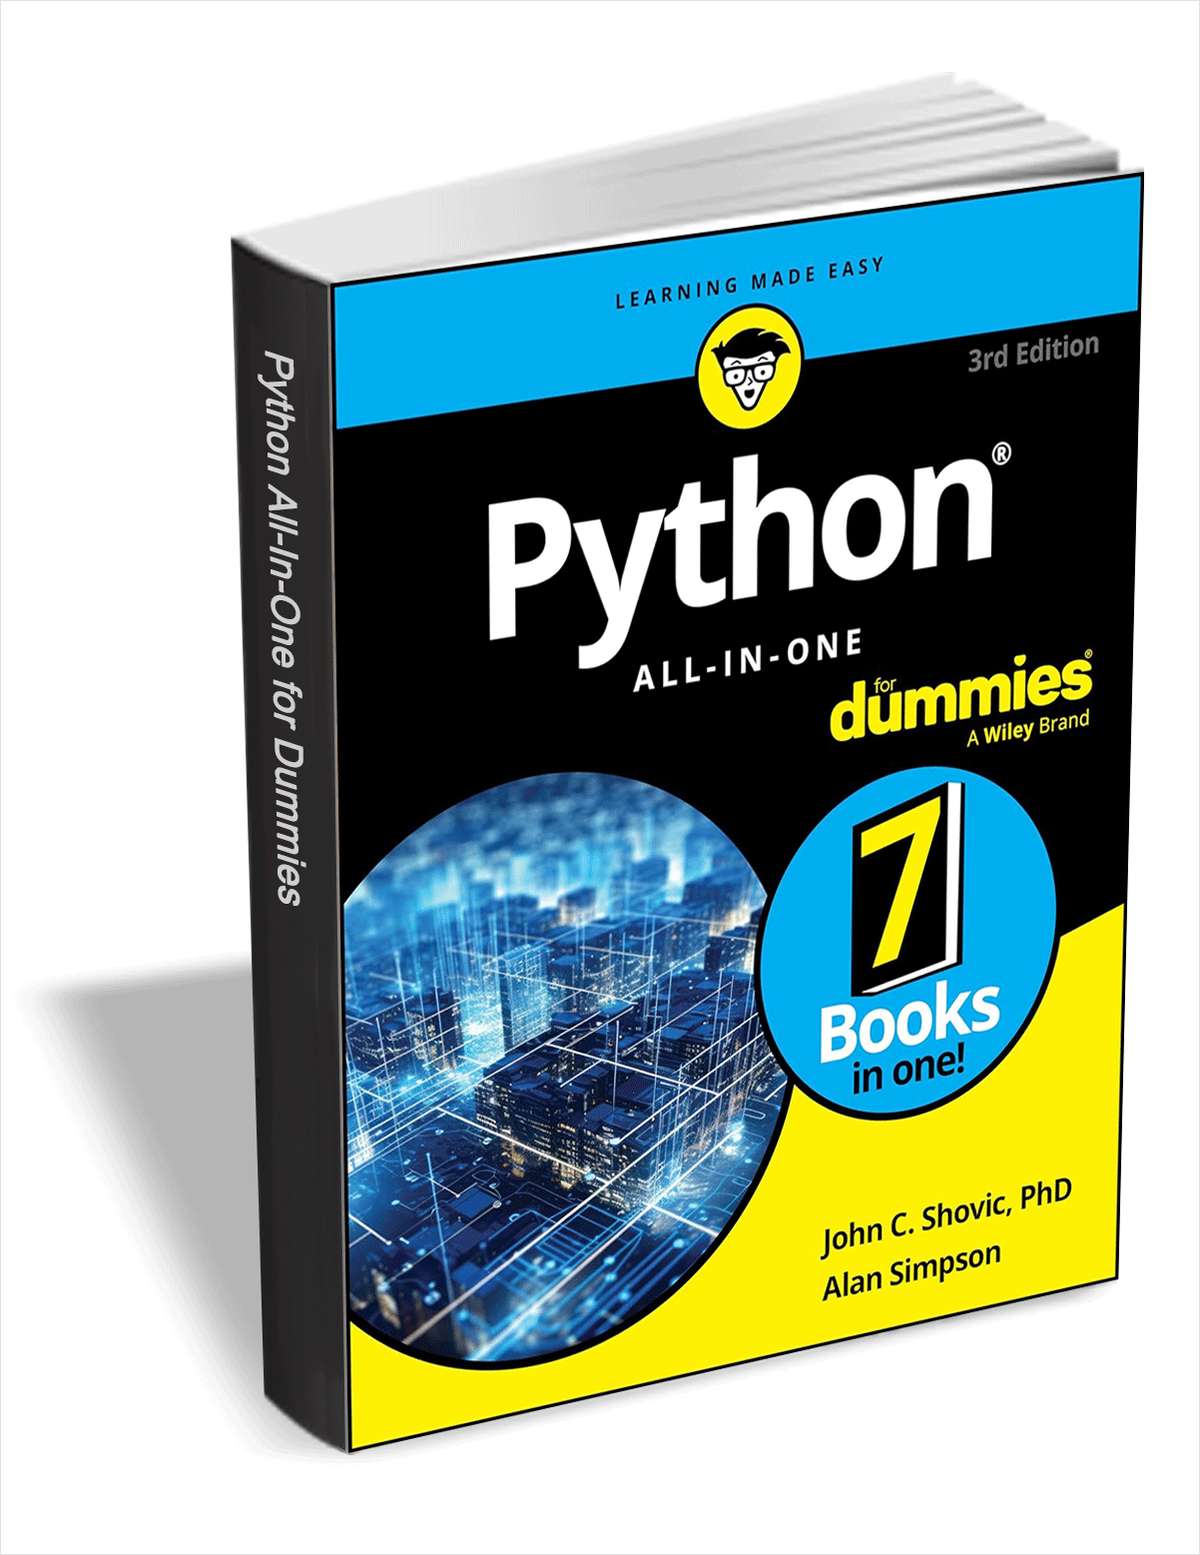 Python All-in-One For Dummies, 3rd Edition ($27.00 Value) FREE for a Limited Time